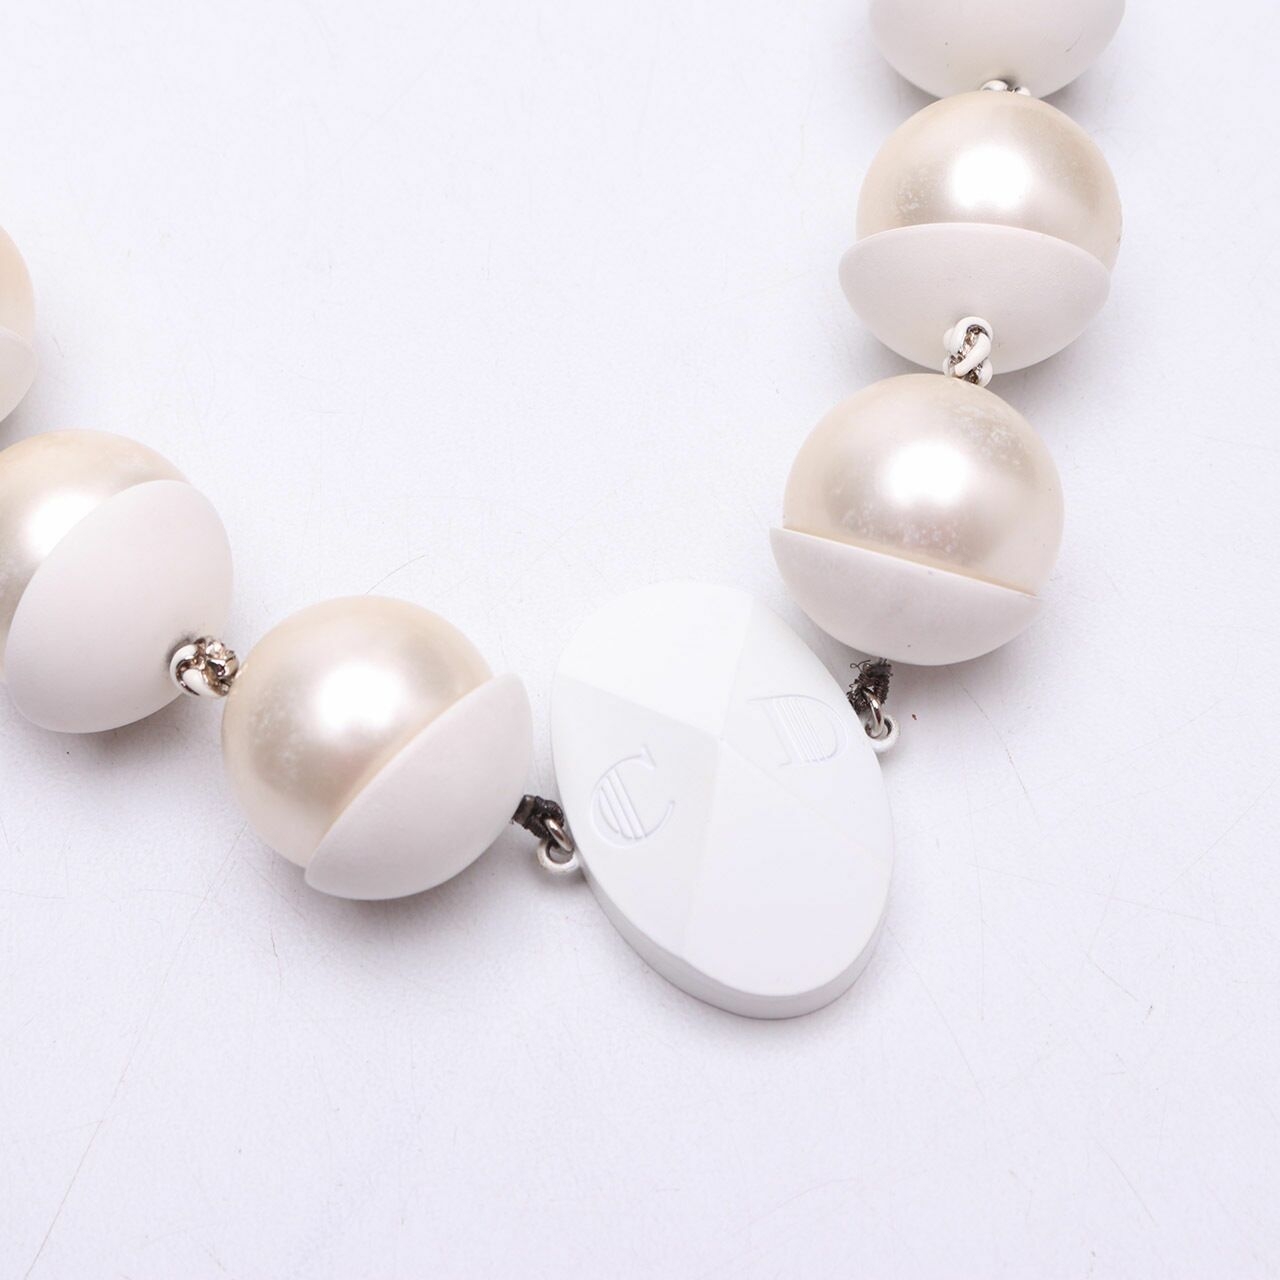 Christian Christian Dior “MISE EN DIOR” White Pearl Necklace Jewelry